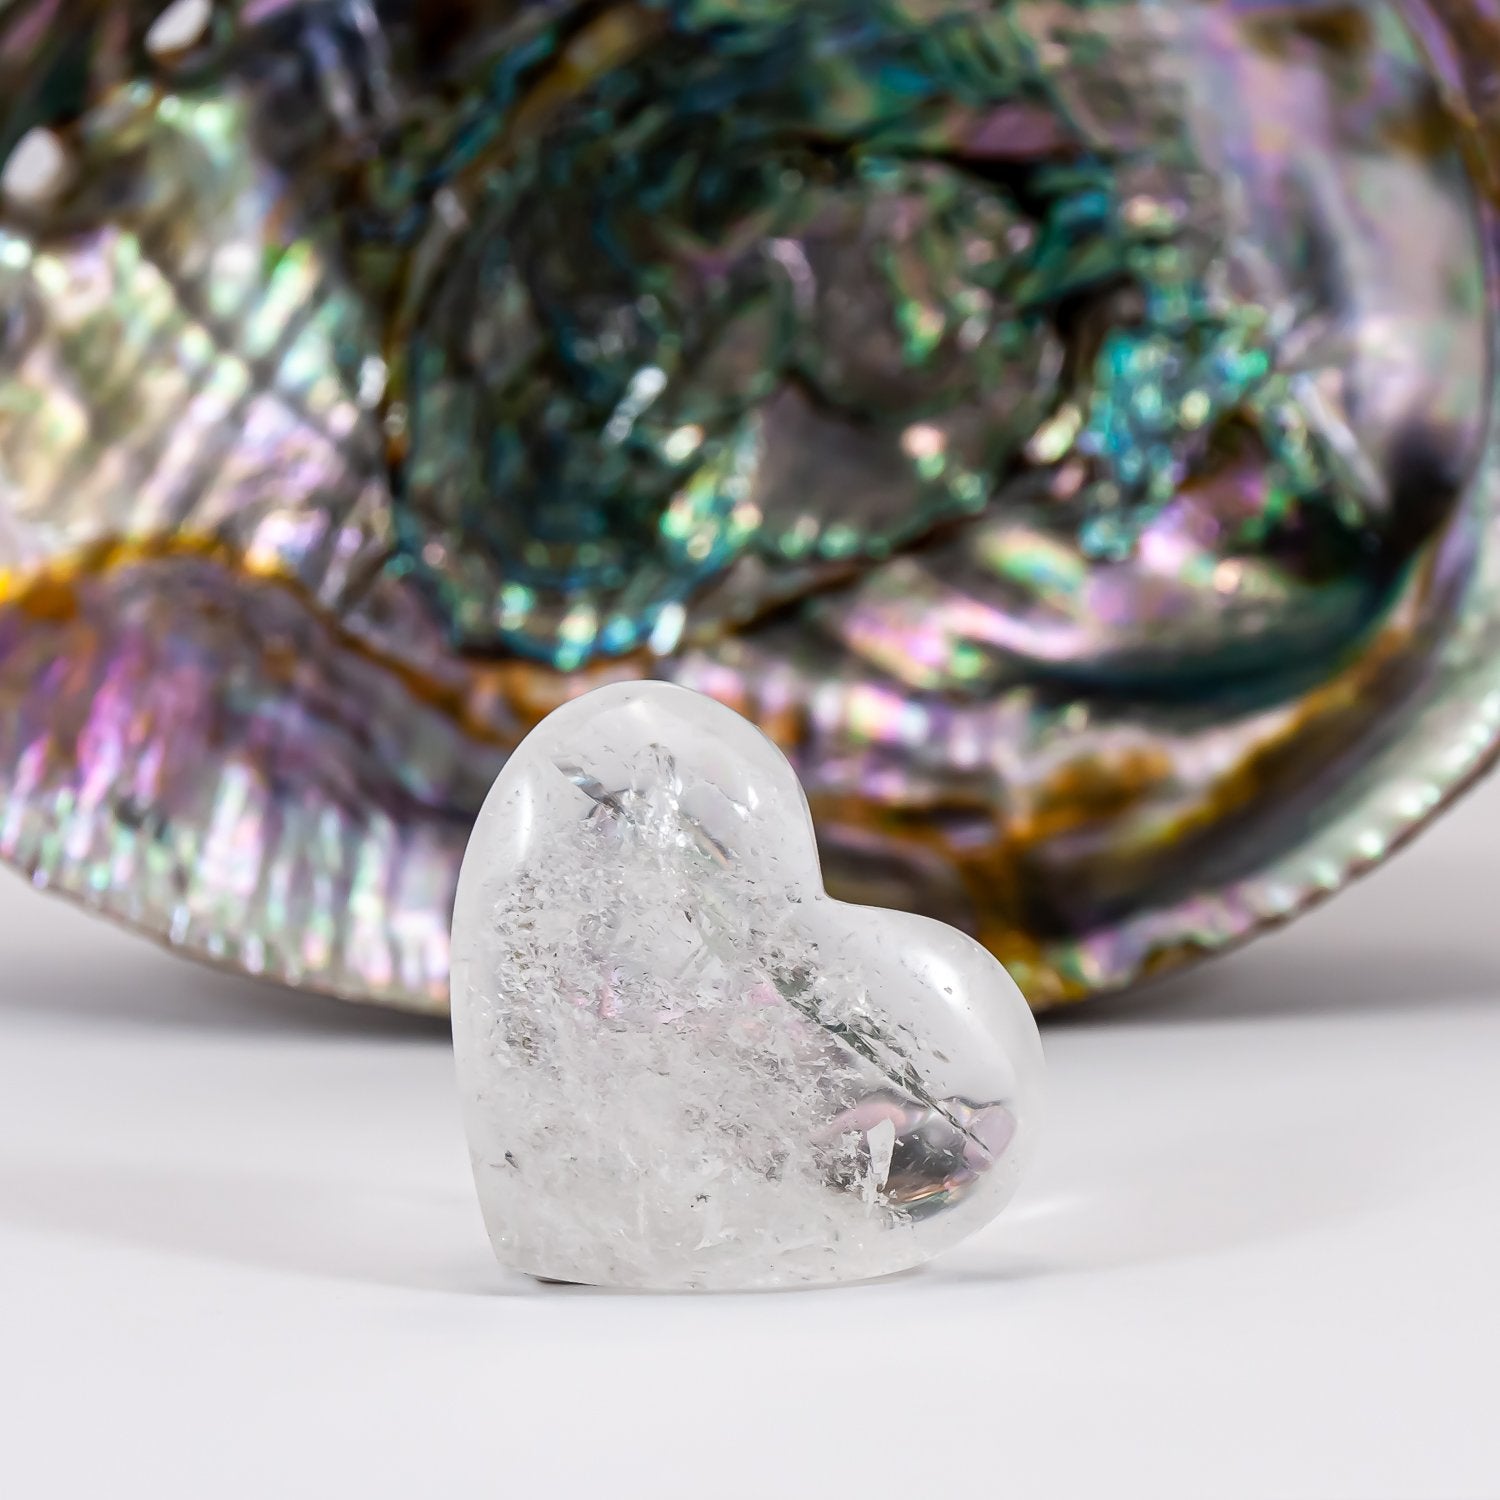 Clear quartz attunement heart close-up. abalone shell in background.